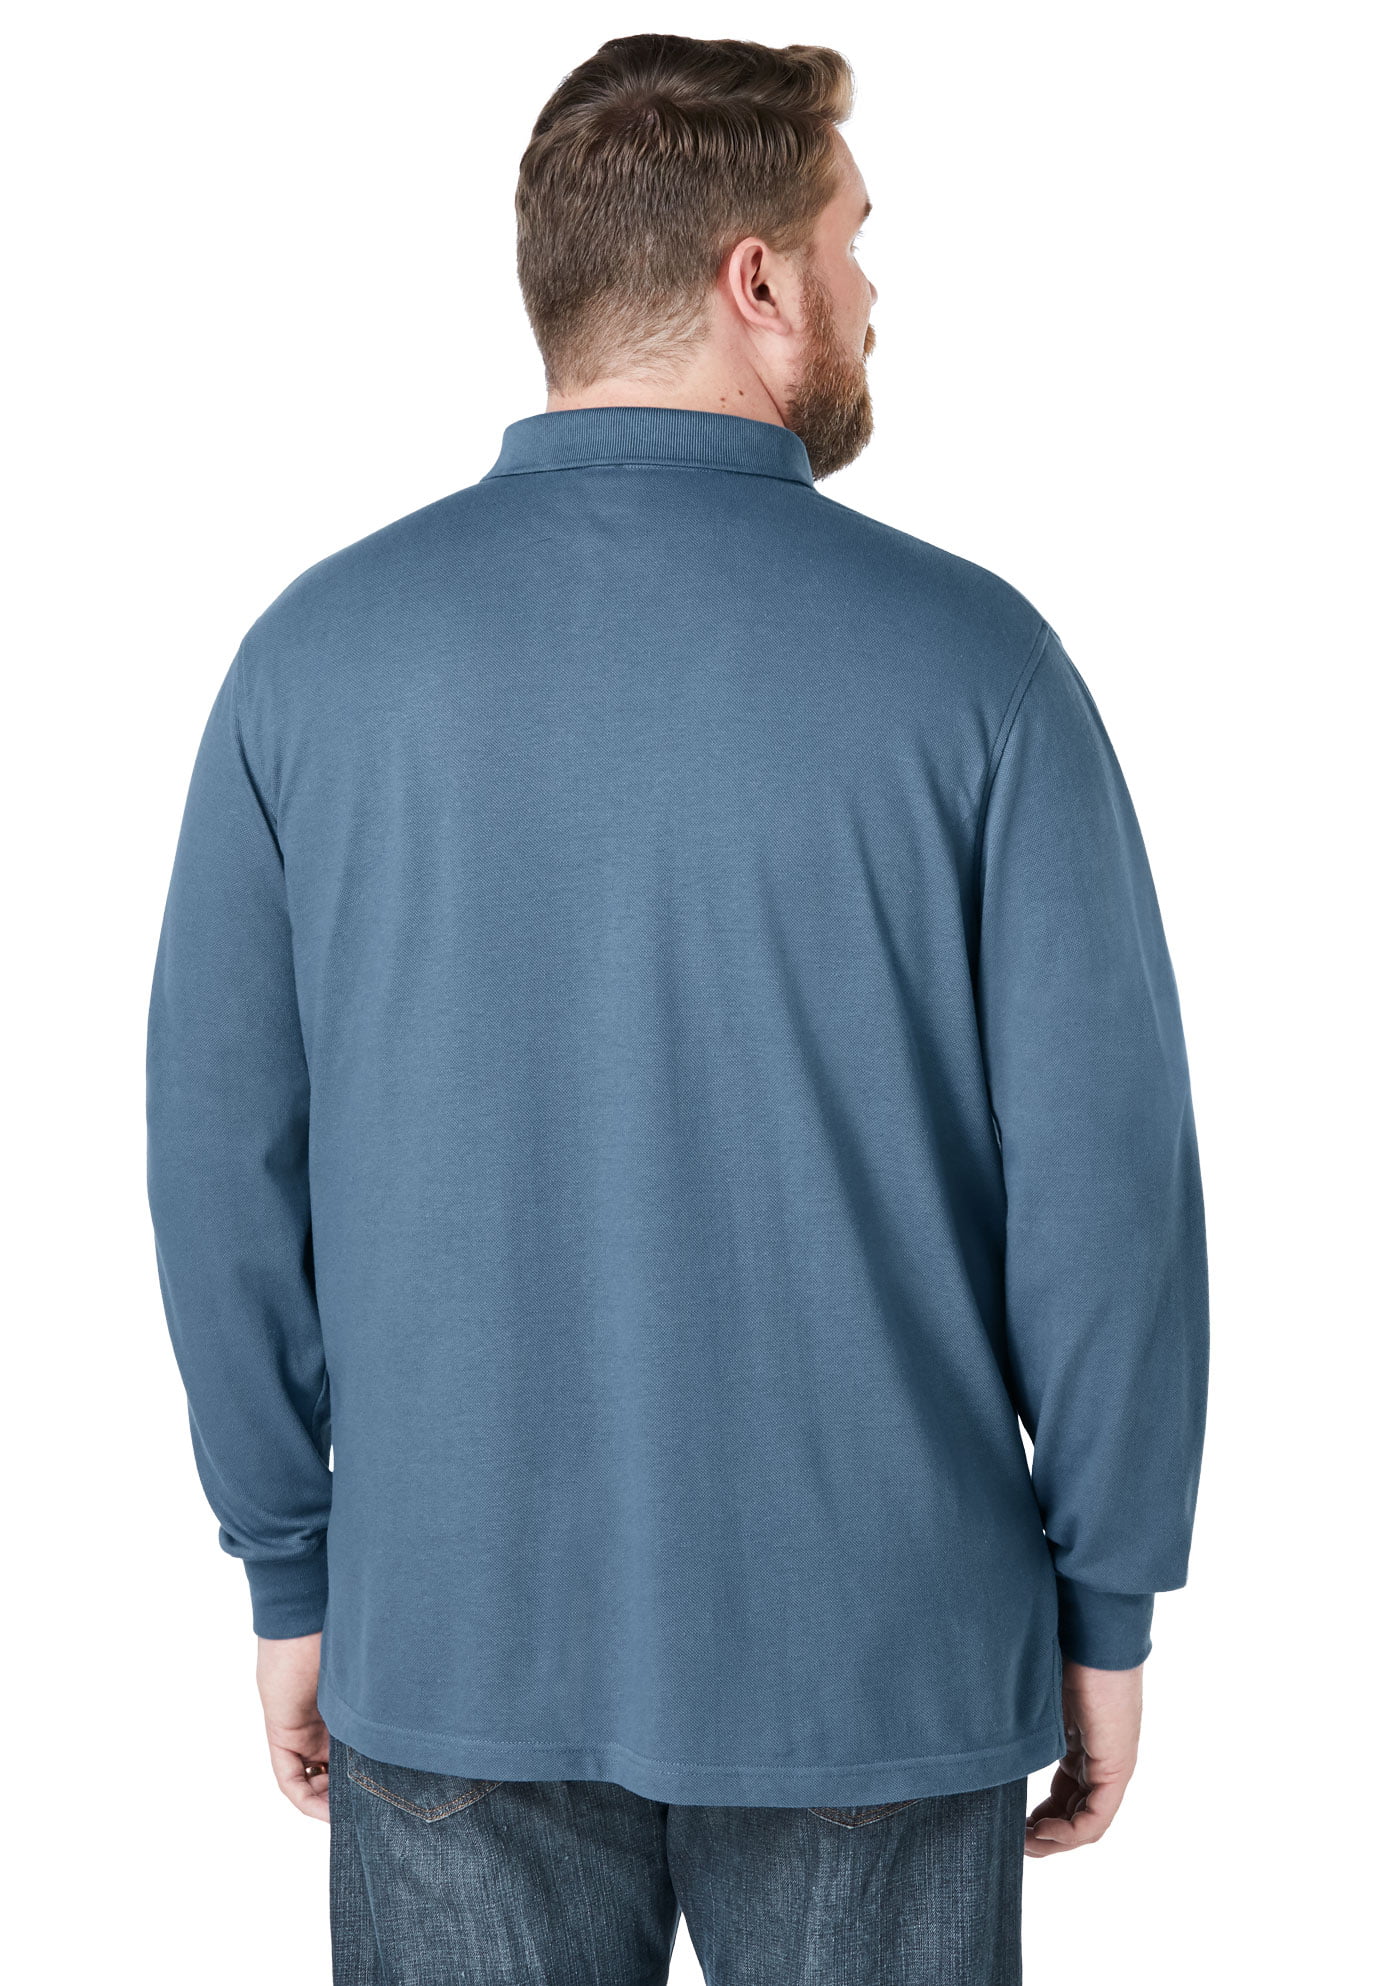 KingSize Mens Big & Tall Long-Sleeve Rugby Polo